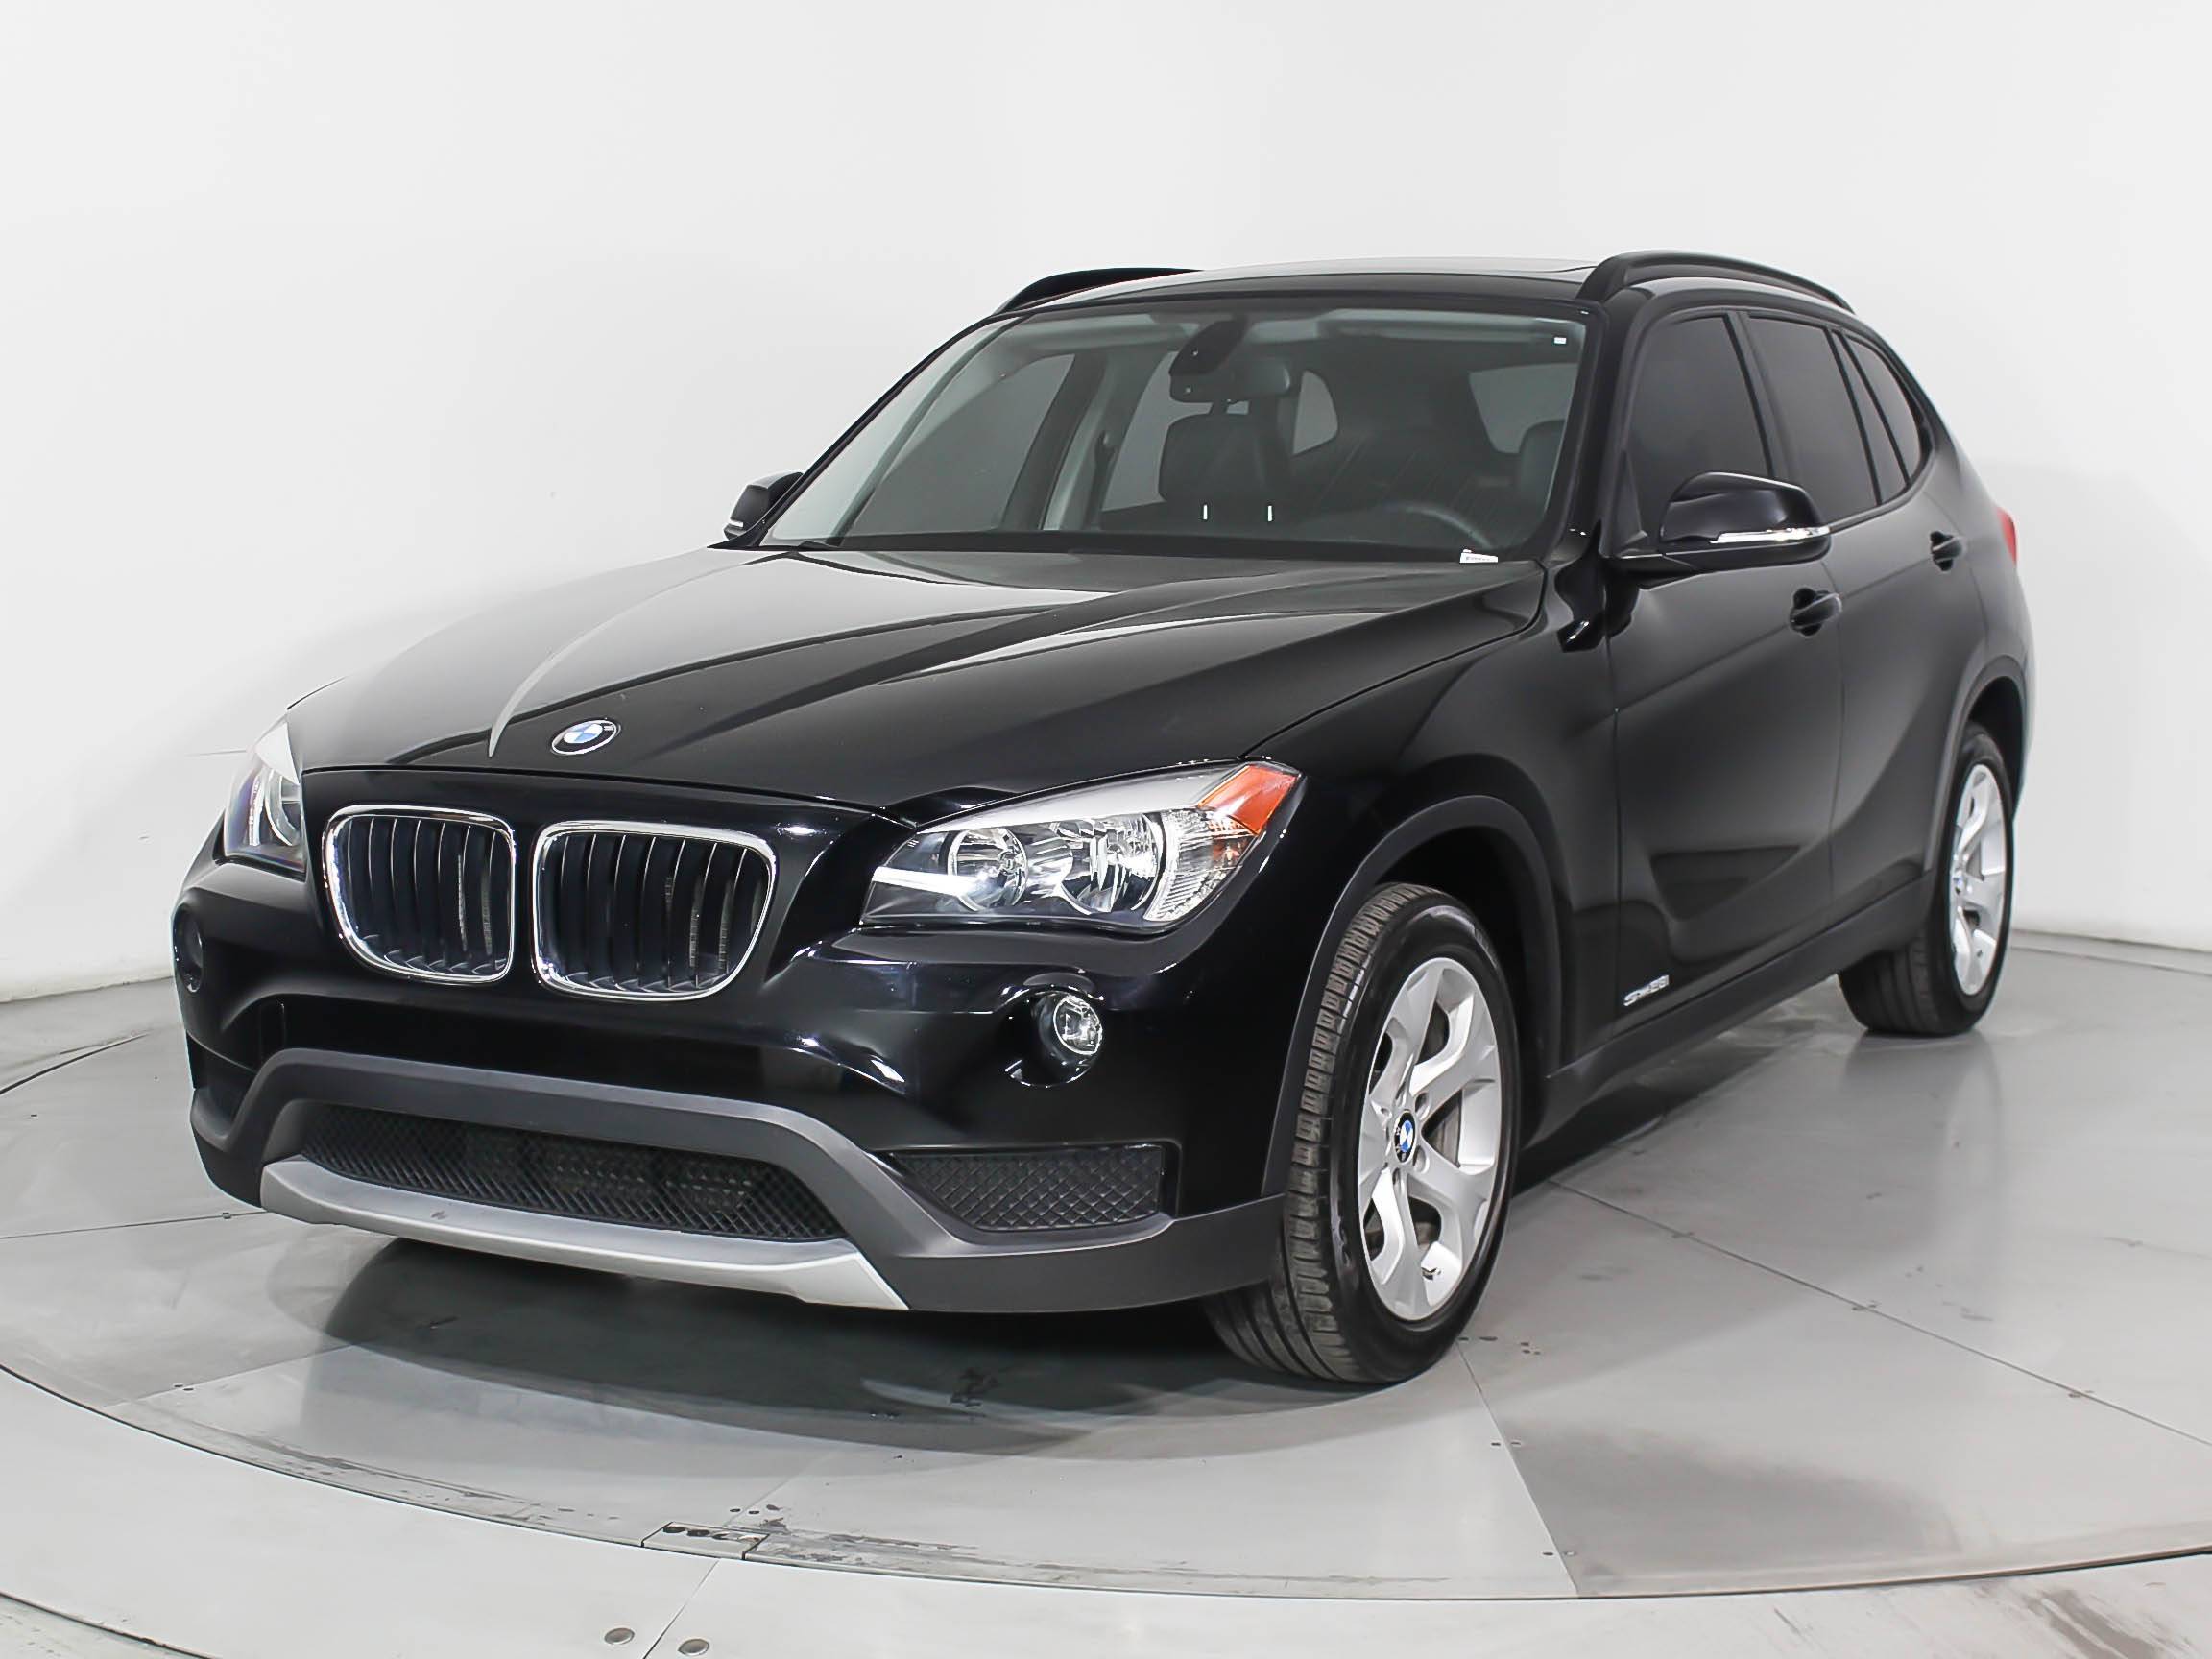 Used 2013 BMW X1 SDRIVE28I SUV for sale in MARGATE, FL | 101895